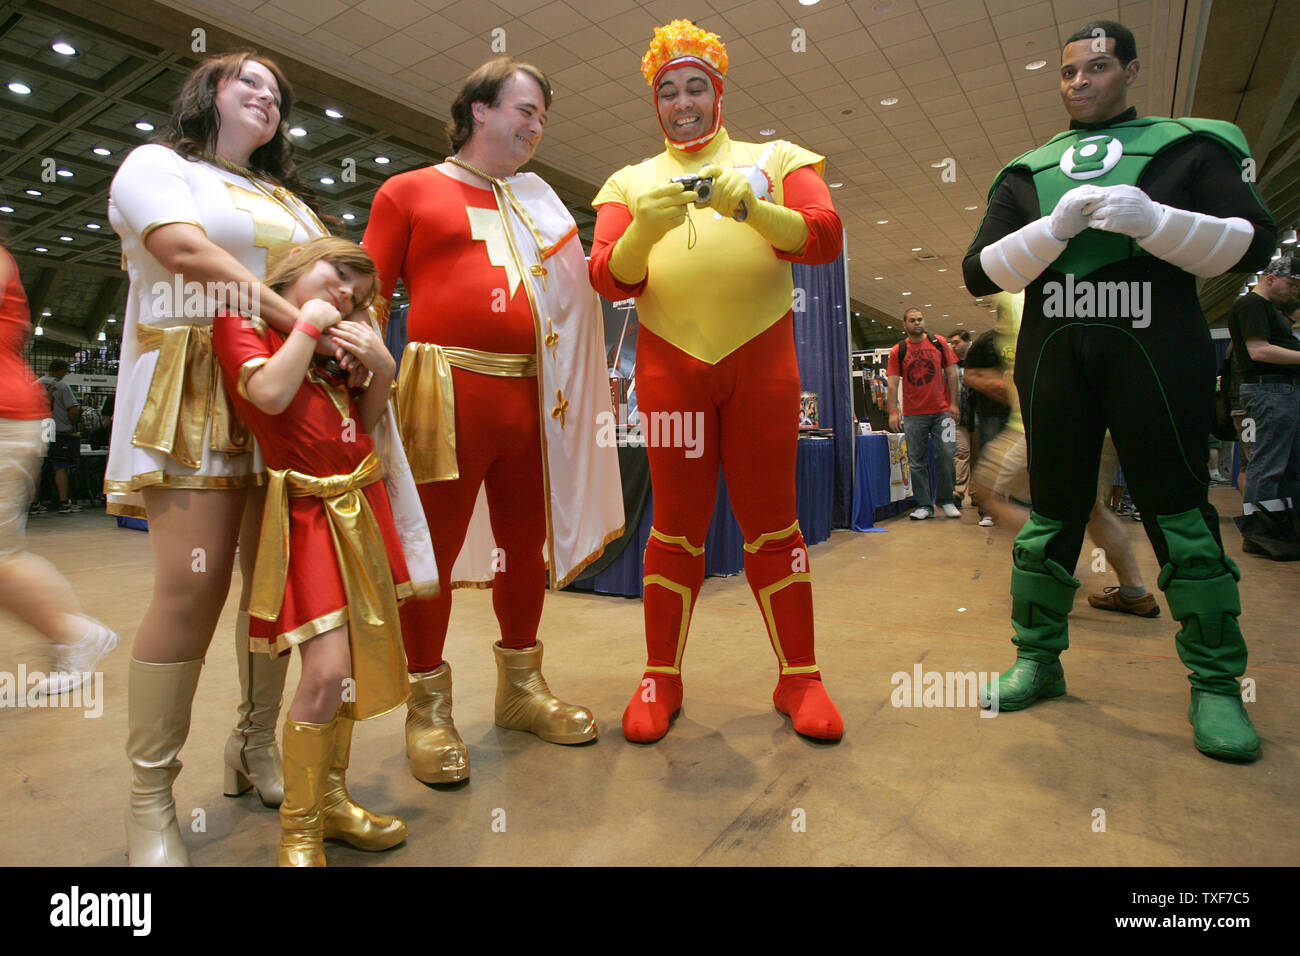 Wes, Natalie, and Ashley Barthlow, 9, from Smithsburg, Va, all dressed as the Marvel Family, chat with Eric Moran, of Philadelphia dressed as Firestorm, and Brian Gregory of Camden, NJ,  dressed as Greenlantern at the 11th annual Comic Con in Baltimore on August 29, 2010. Over 100 contestants showed off their best impressions of comic book heros and villains on costume contest day.  UPI/Greg Whitesell Stock Photo